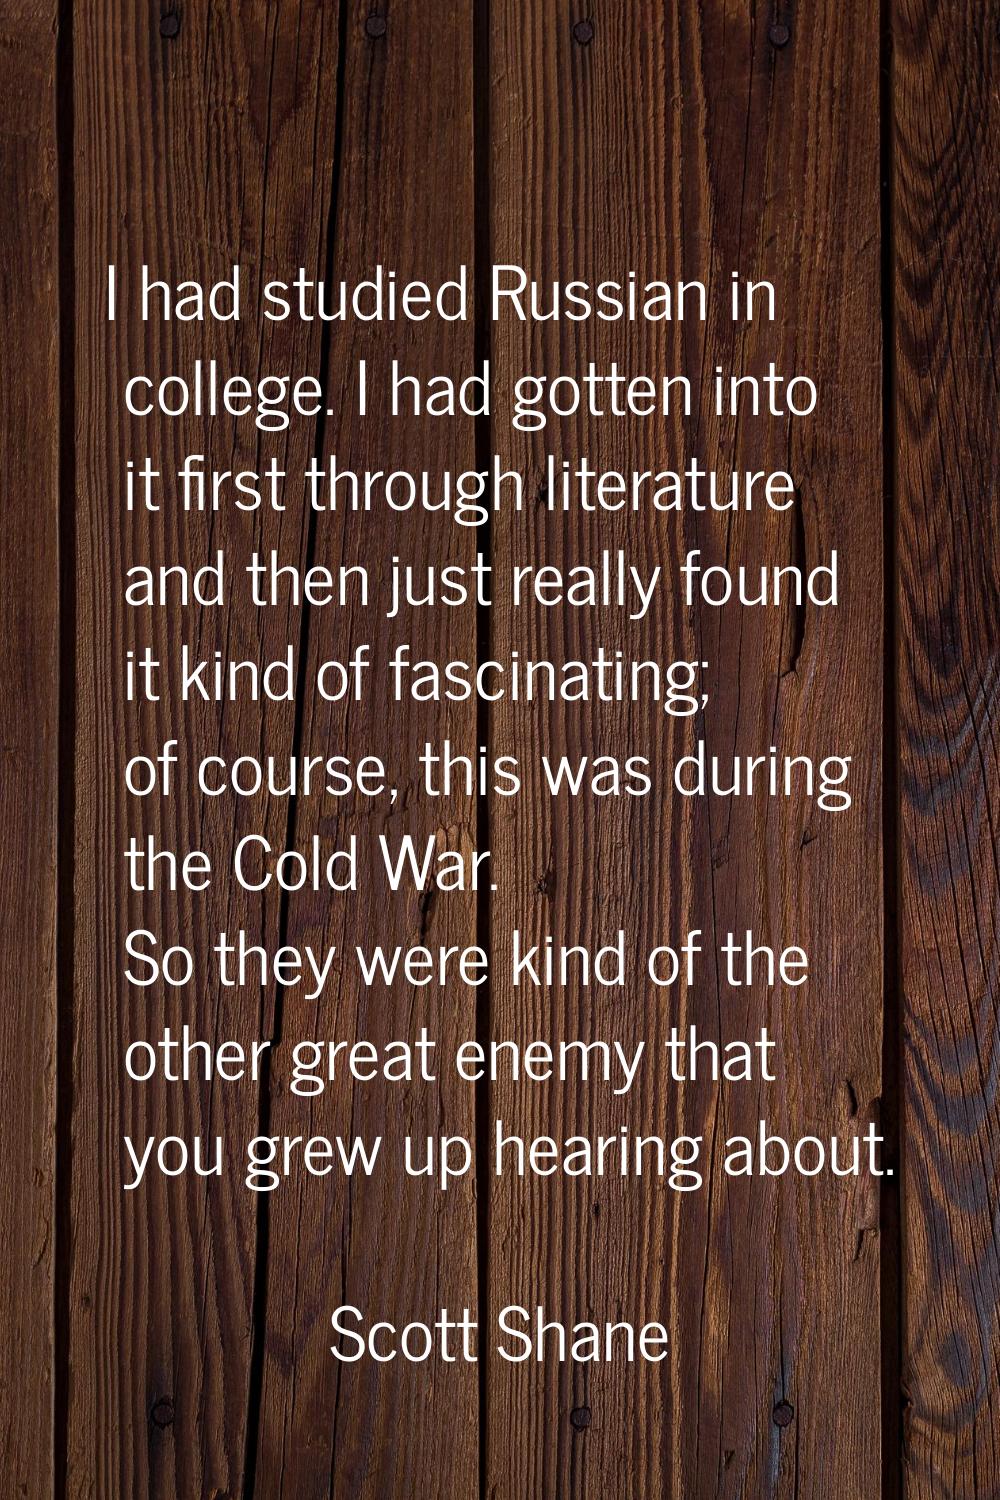 I had studied Russian in college. I had gotten into it first through literature and then just reall